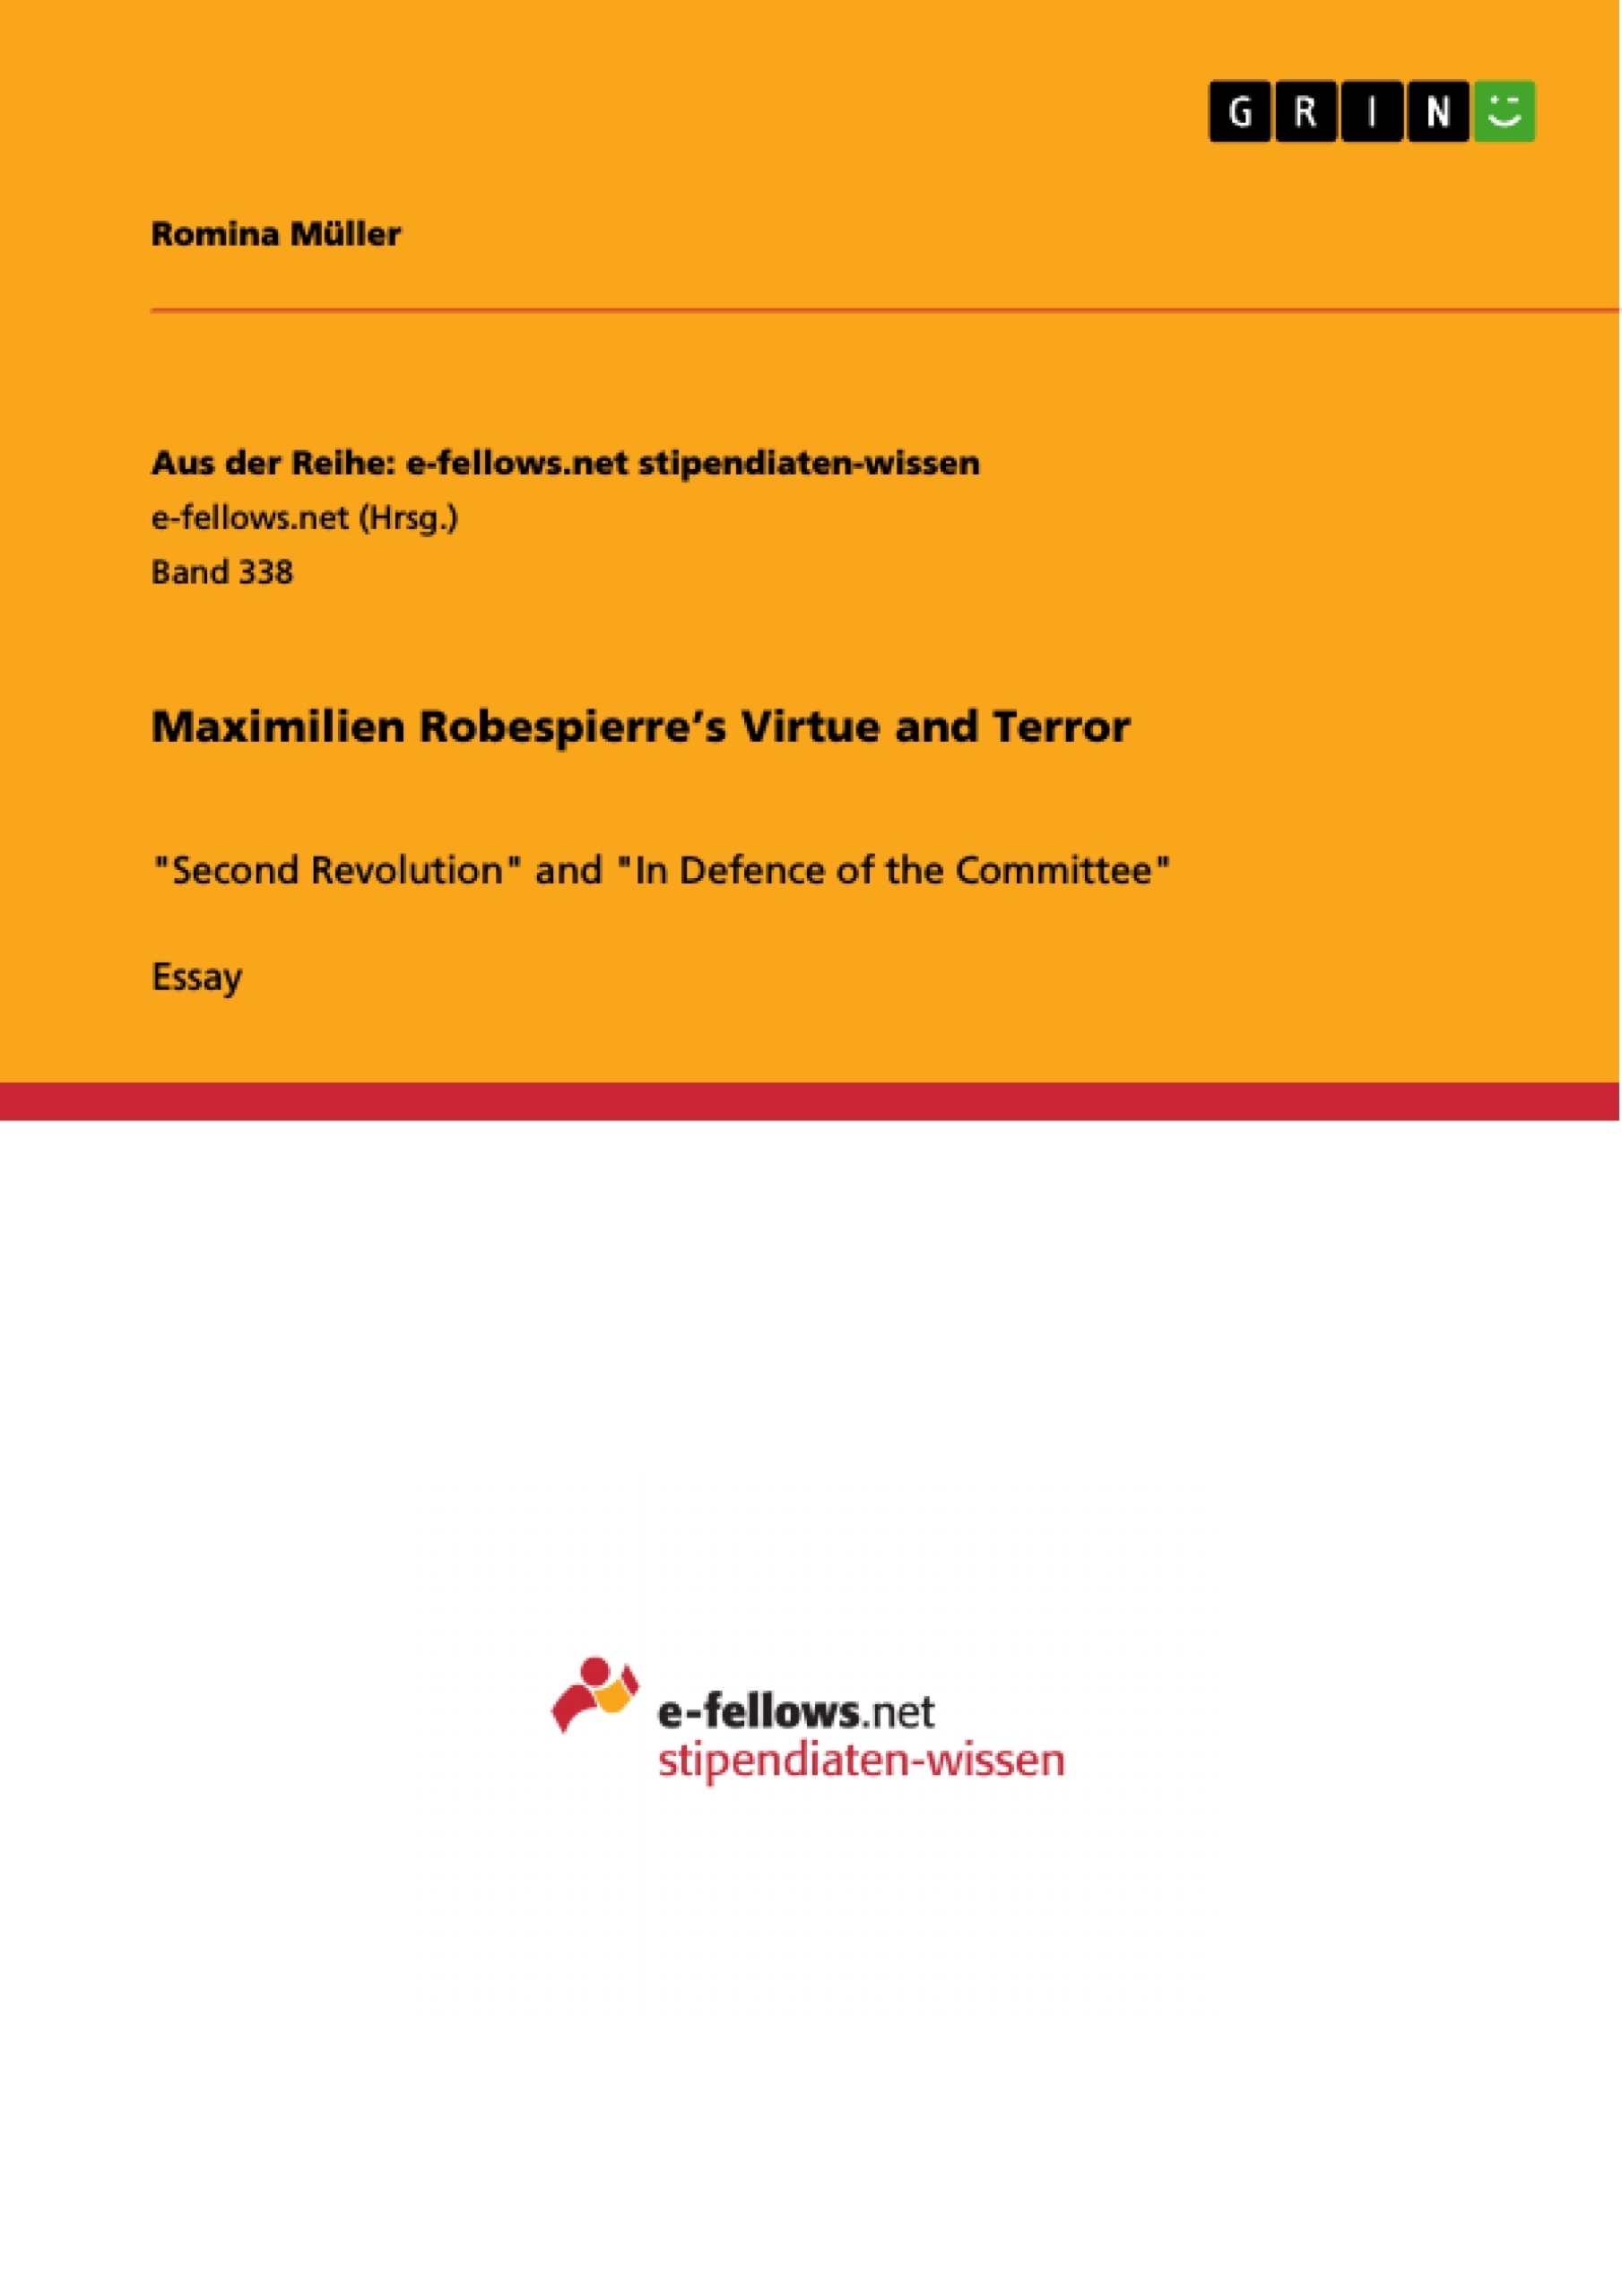 Title: Maximilien Robespierre’s Virtue and Terror